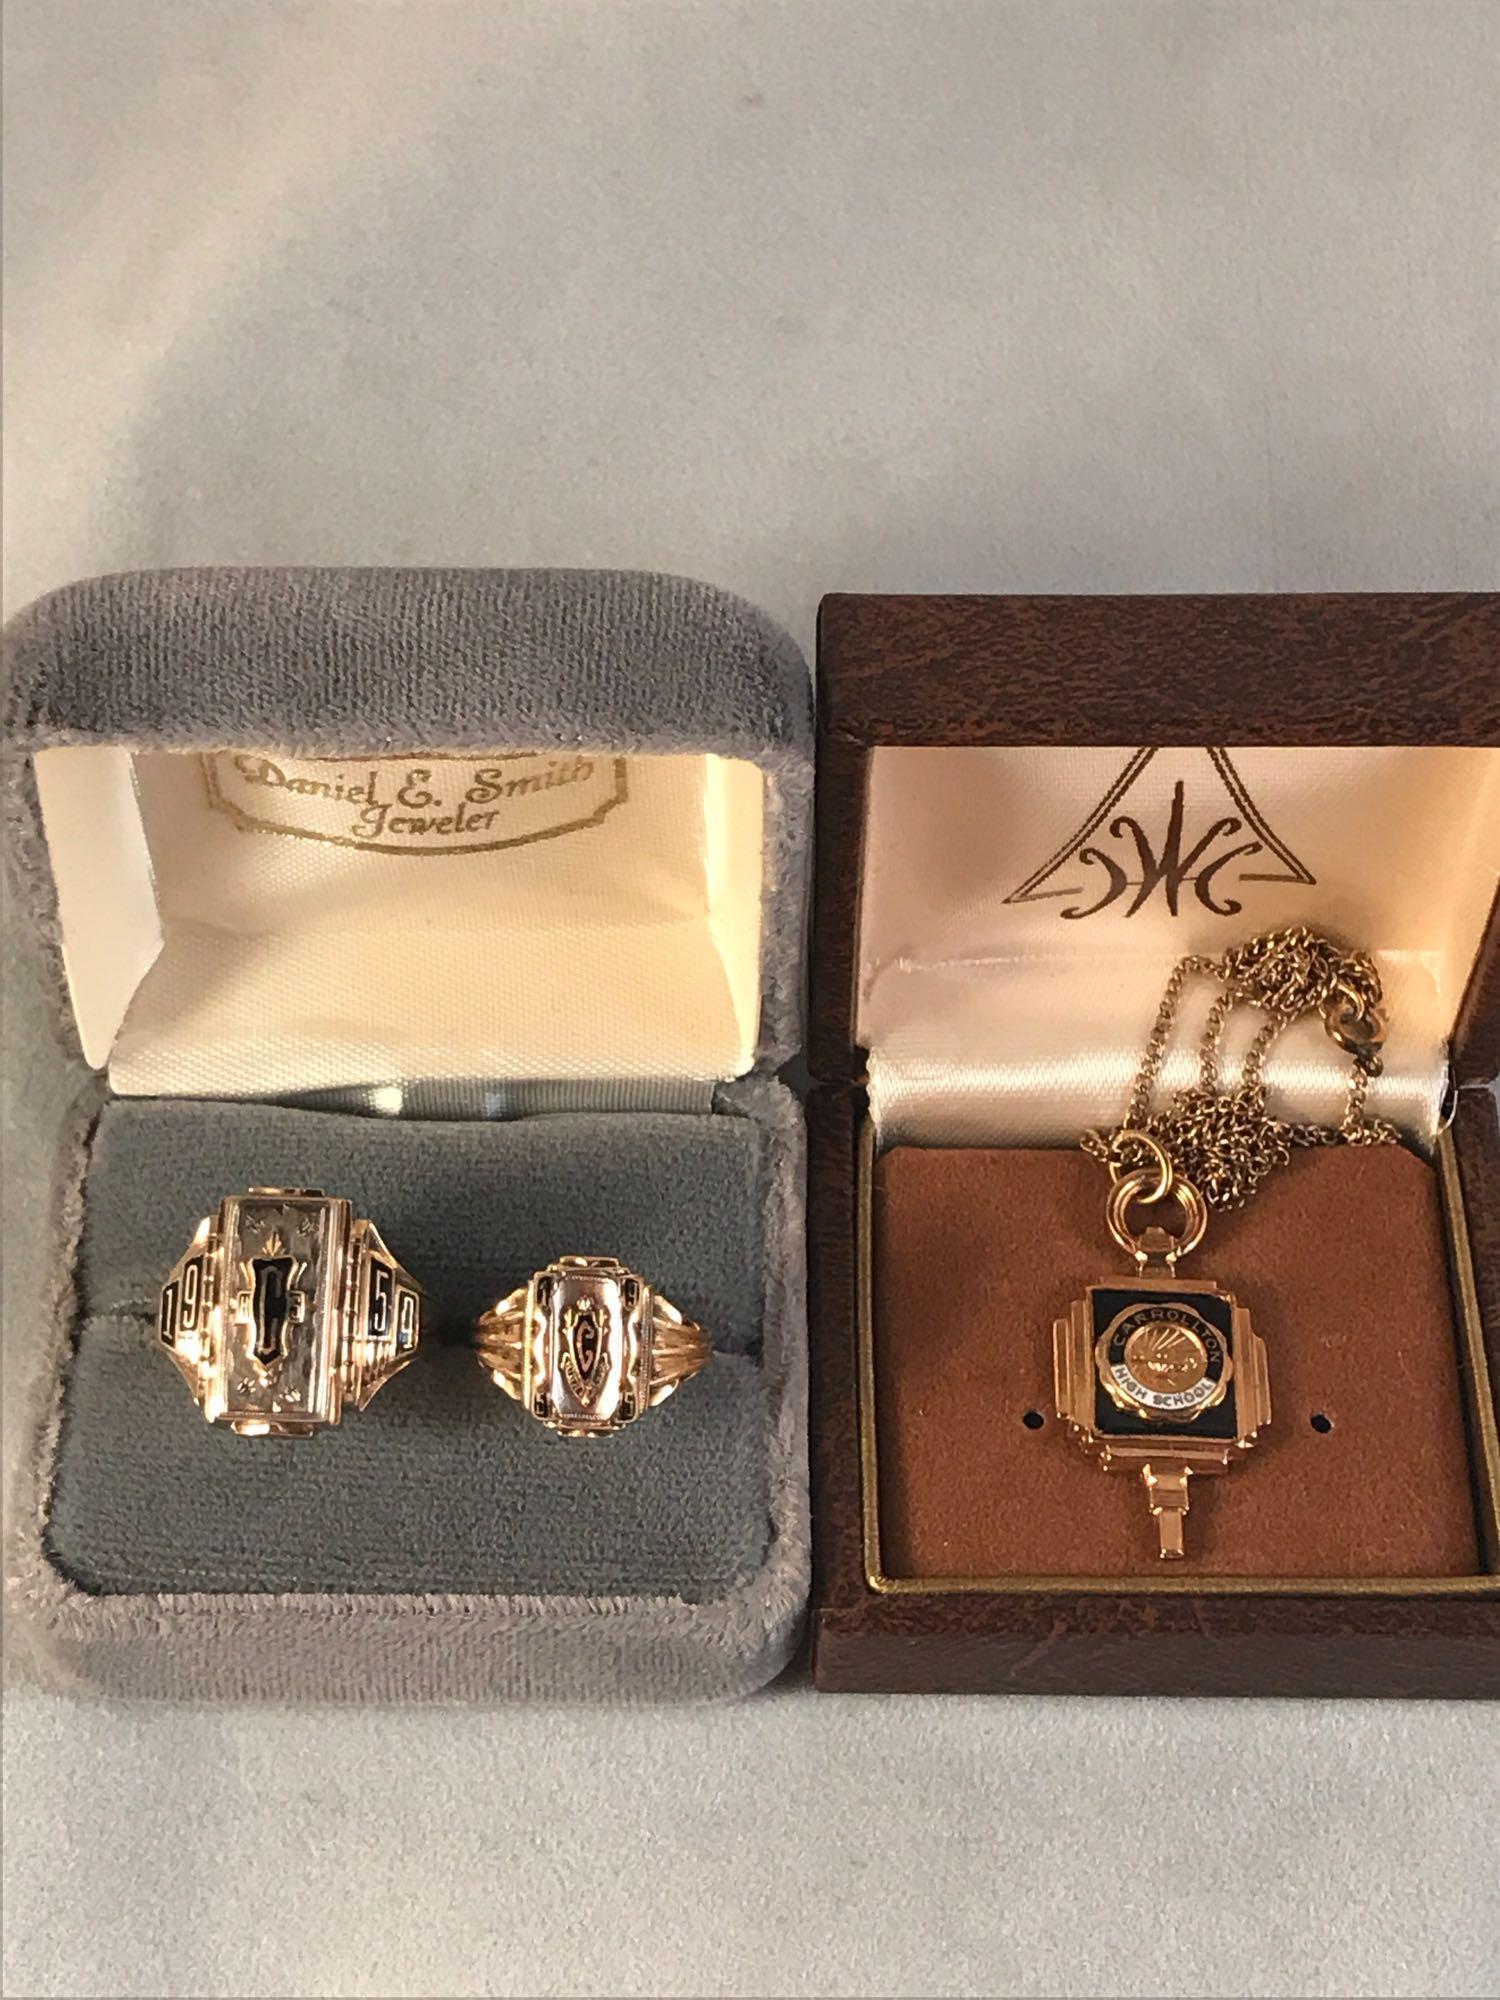 (2) 10K Carrollton HS men's and women's rings 1959 and 1955 - 7.3DWT